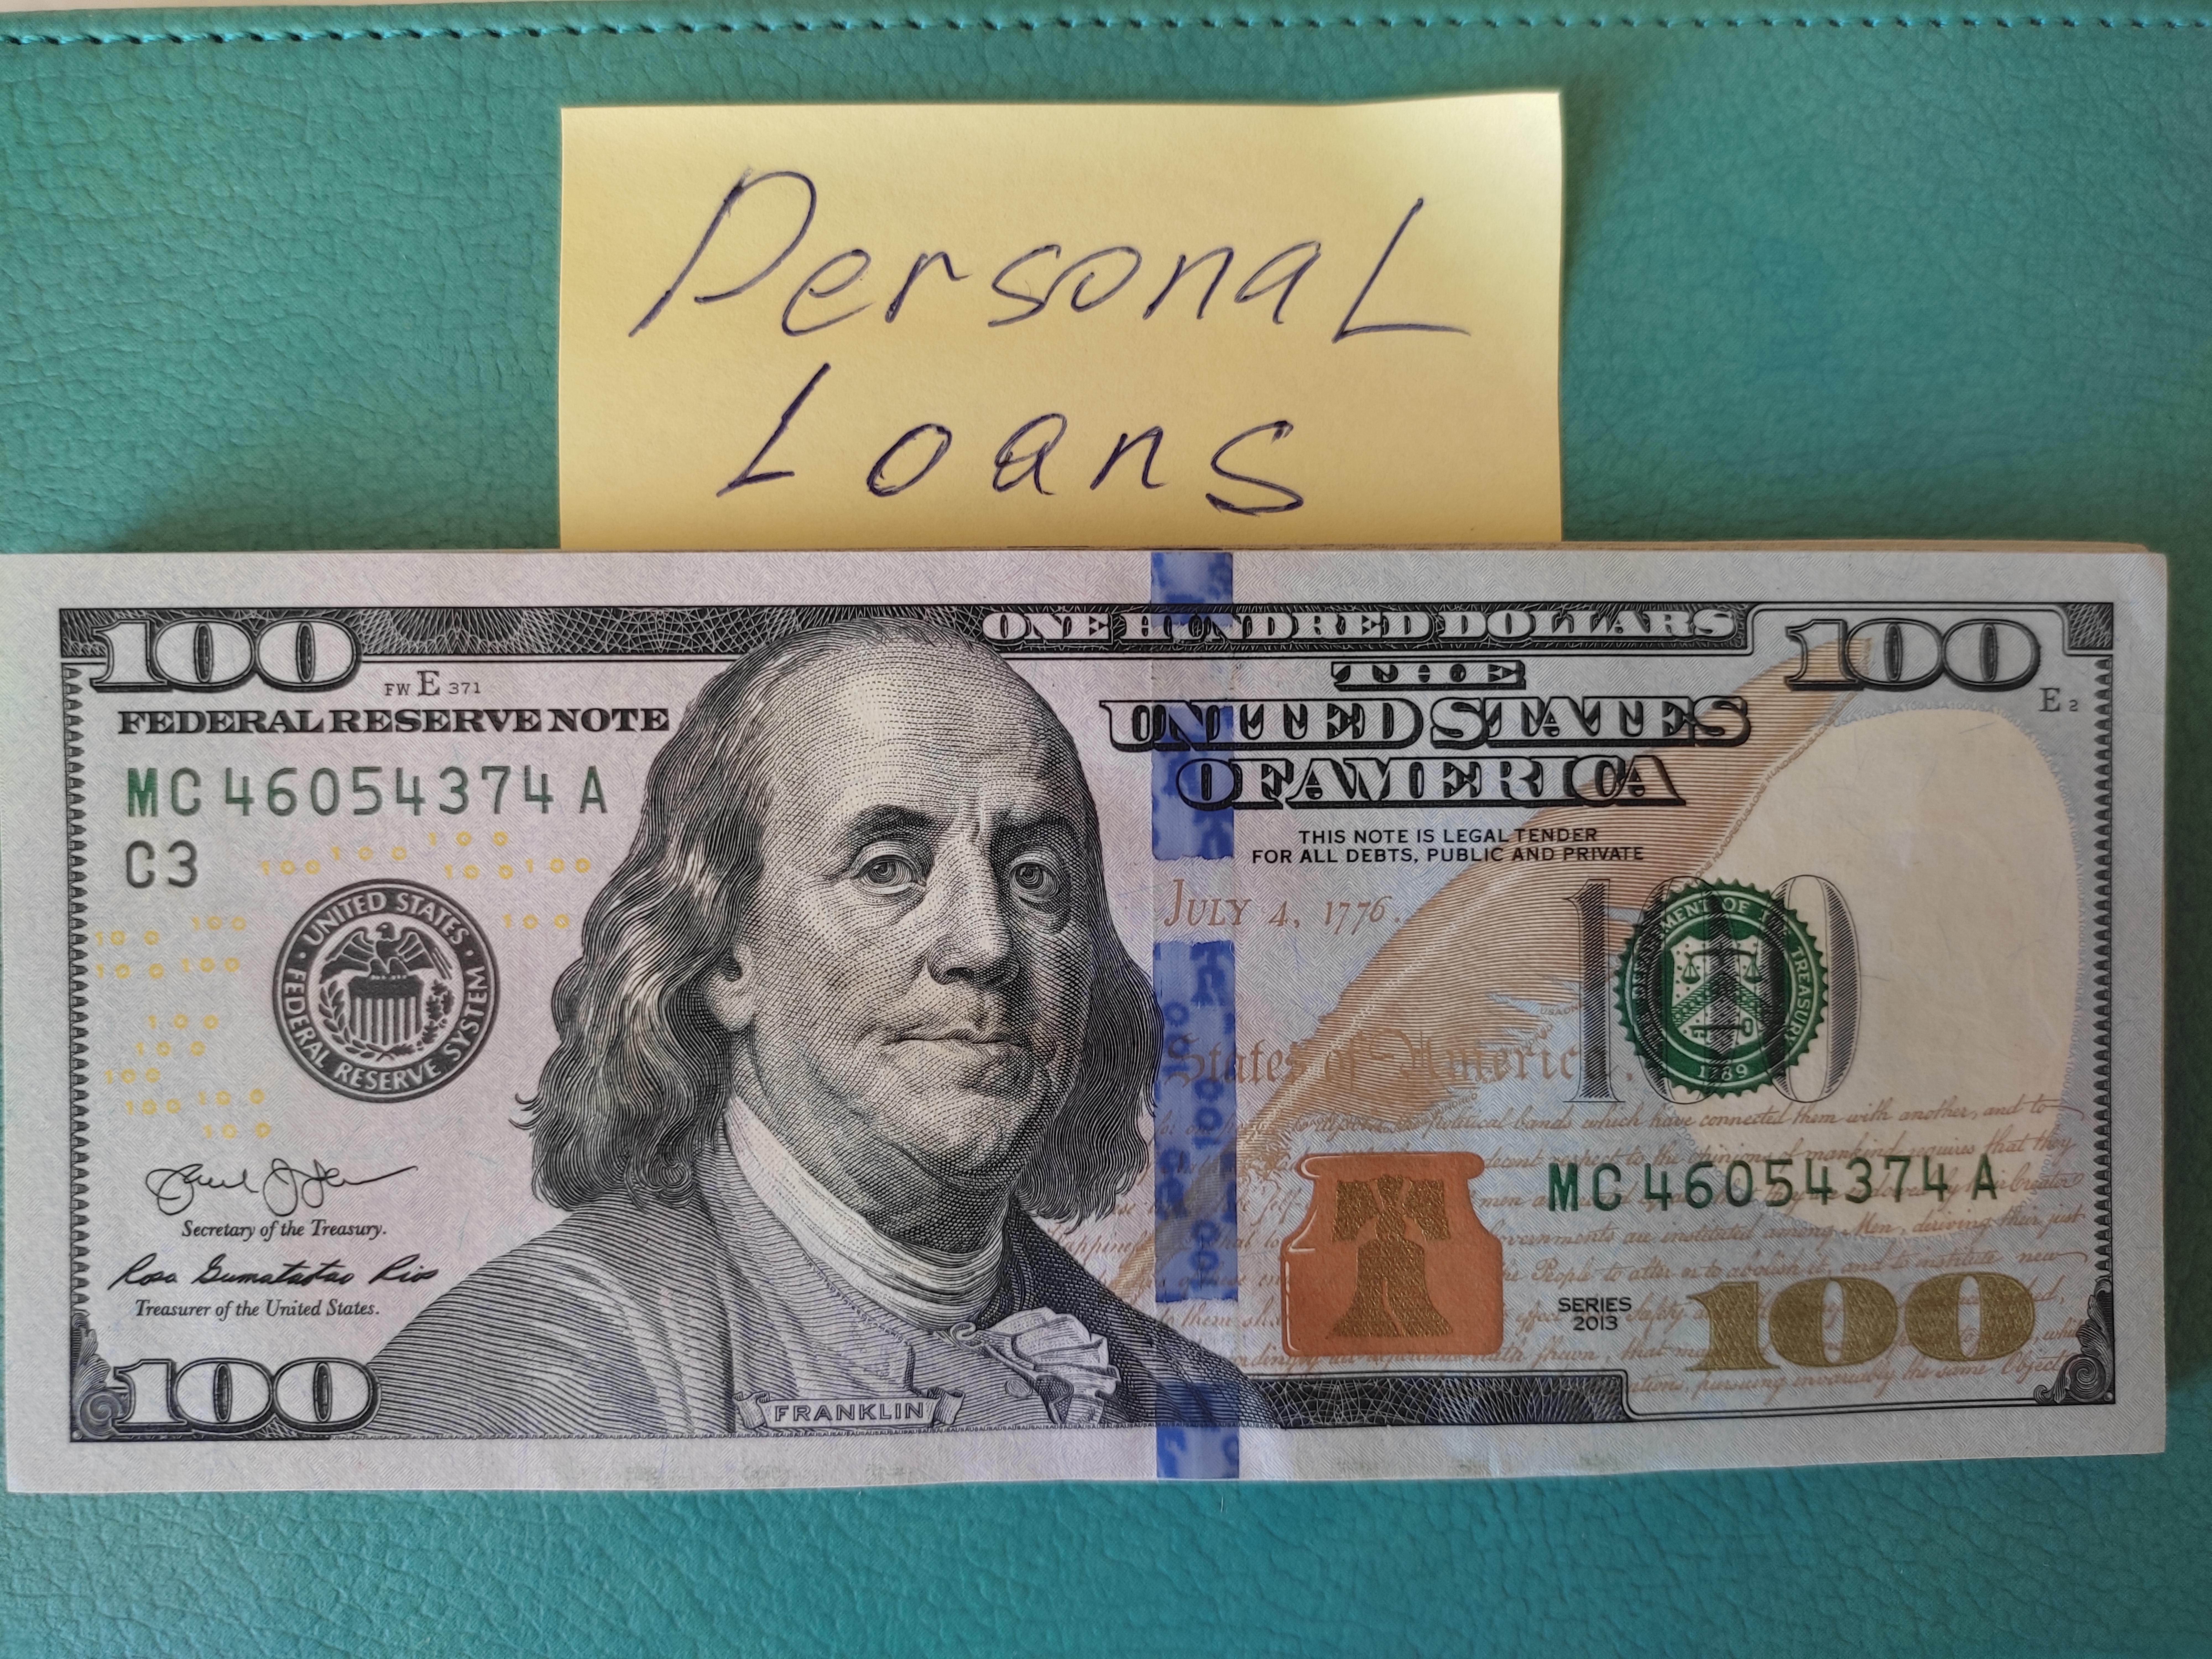 There are dollars on the table and a sticker with the inscription personal loans.